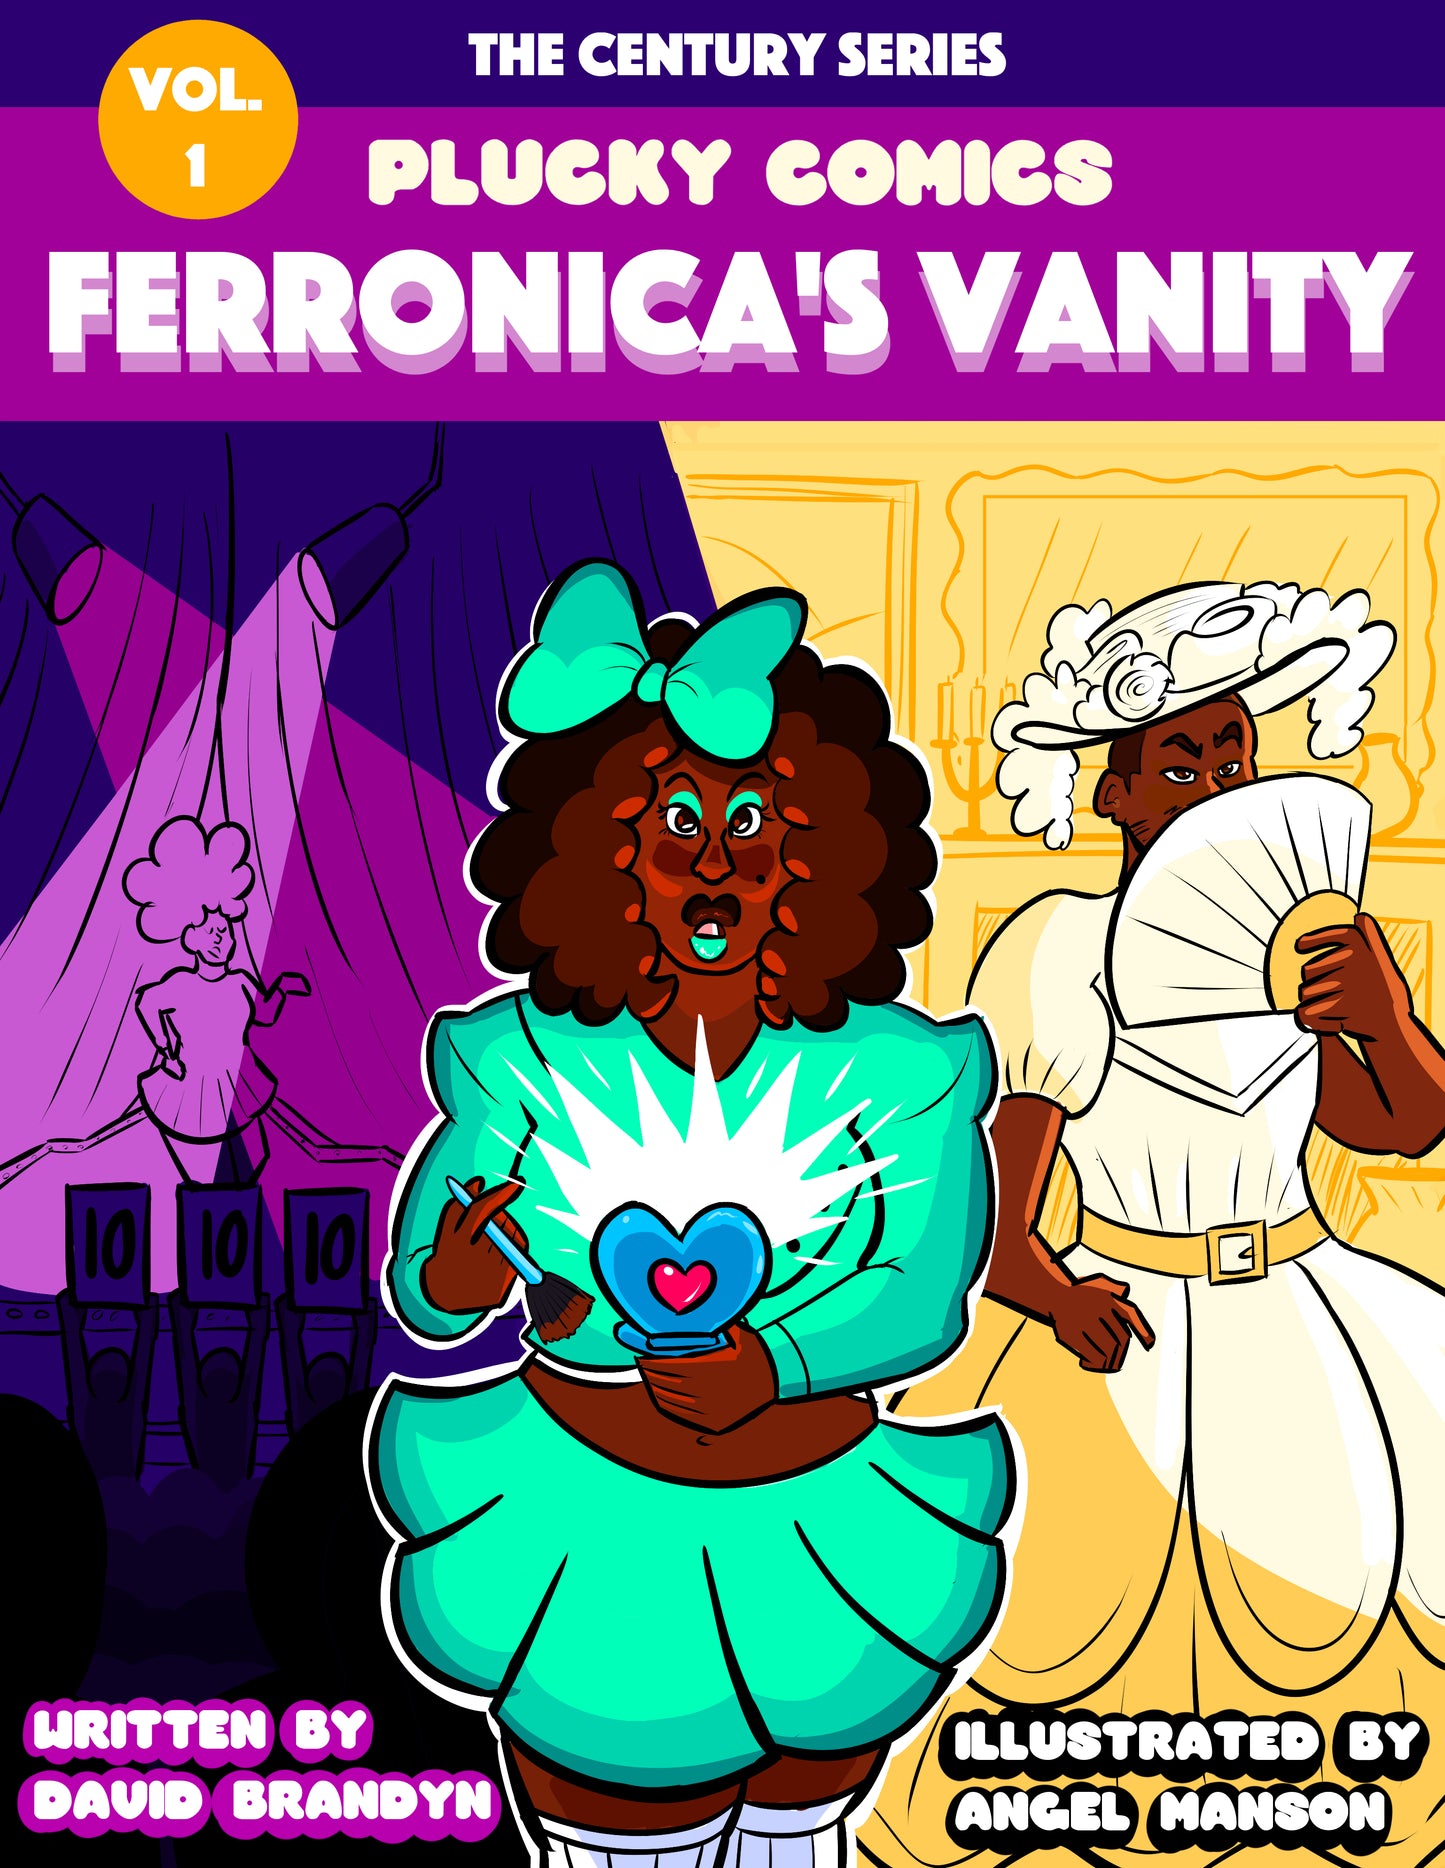 Our First Comic: Ferronica’s Vanity